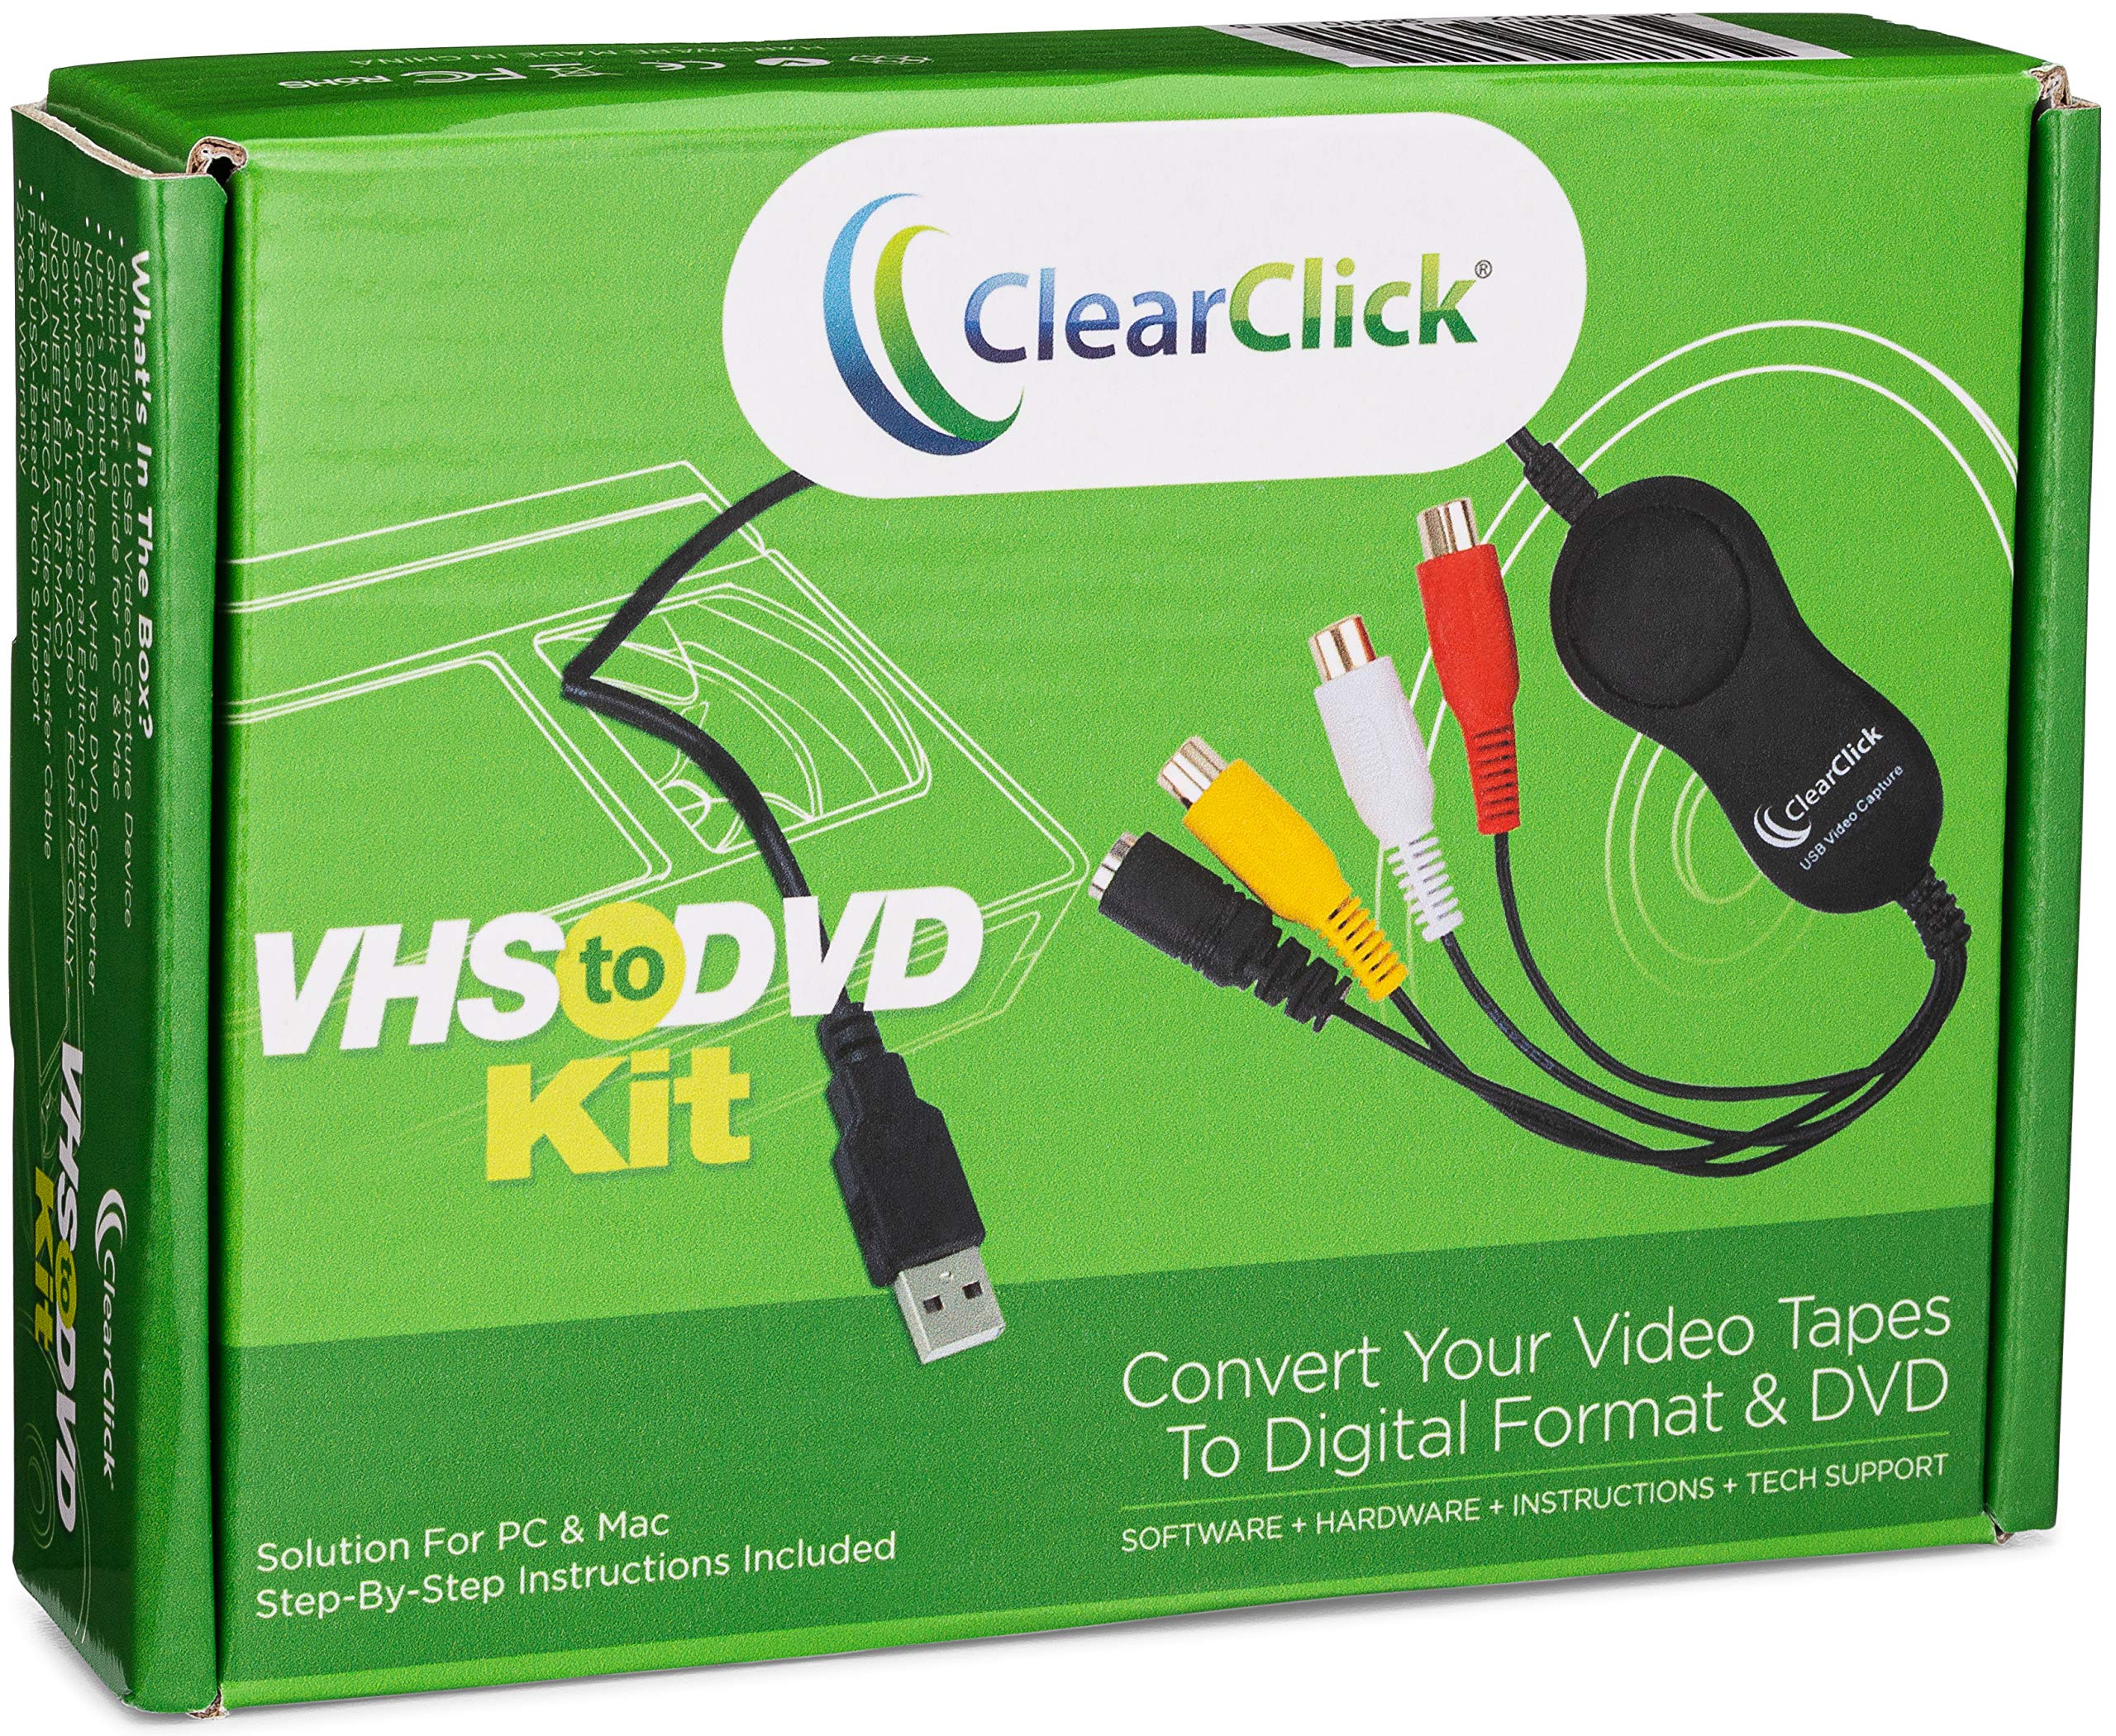 DVD to digital conversion software